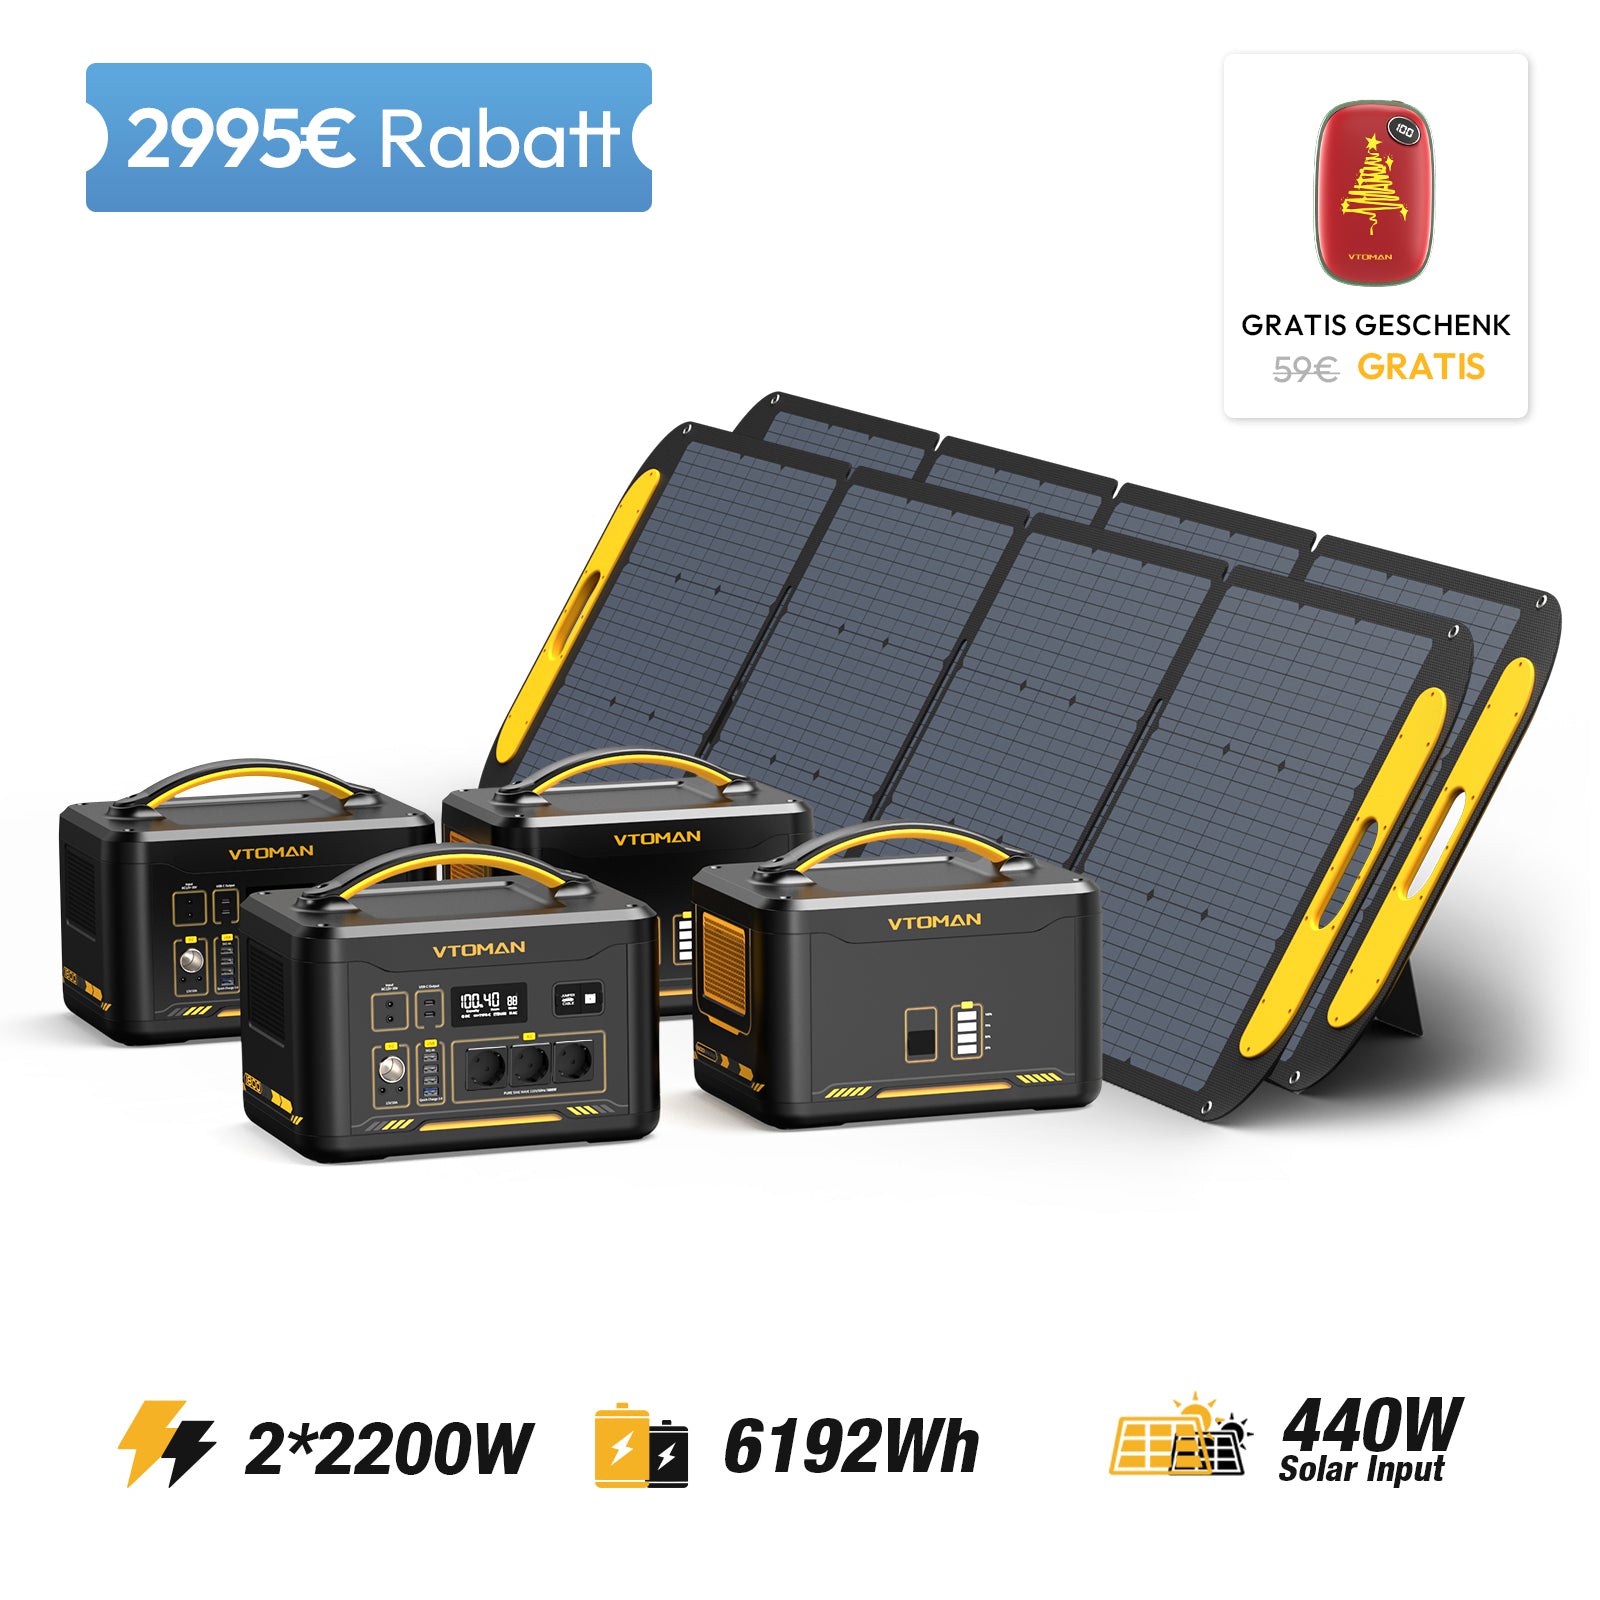 Jump 2200W/6192Wh 440W Solargenerator